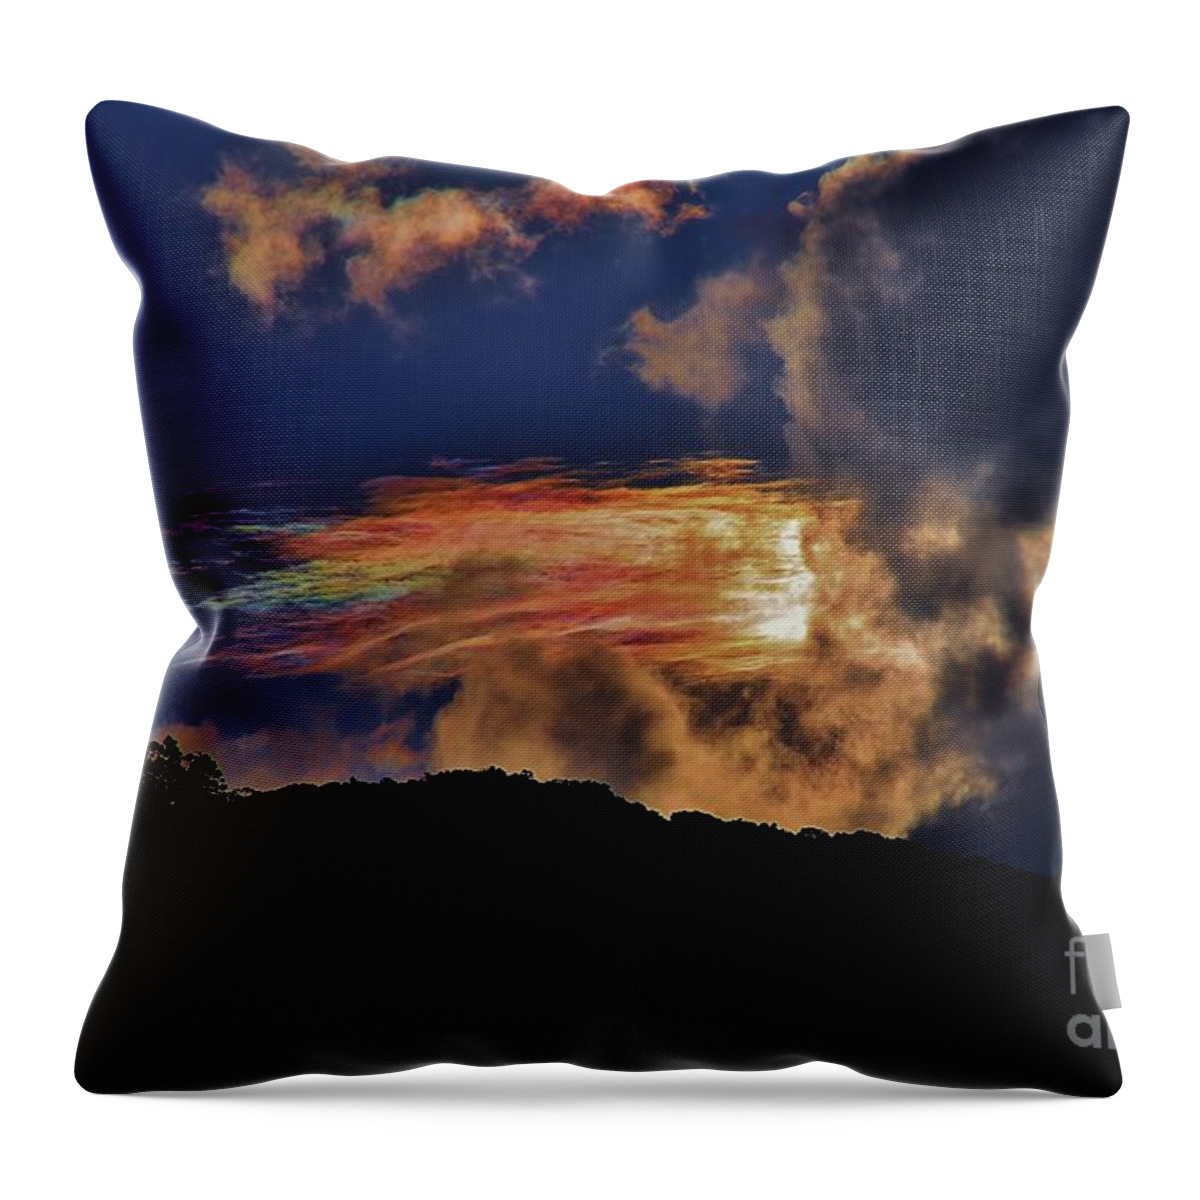 Clouds Throw Pillow featuring the photograph Electric Rainbow by Craig Wood